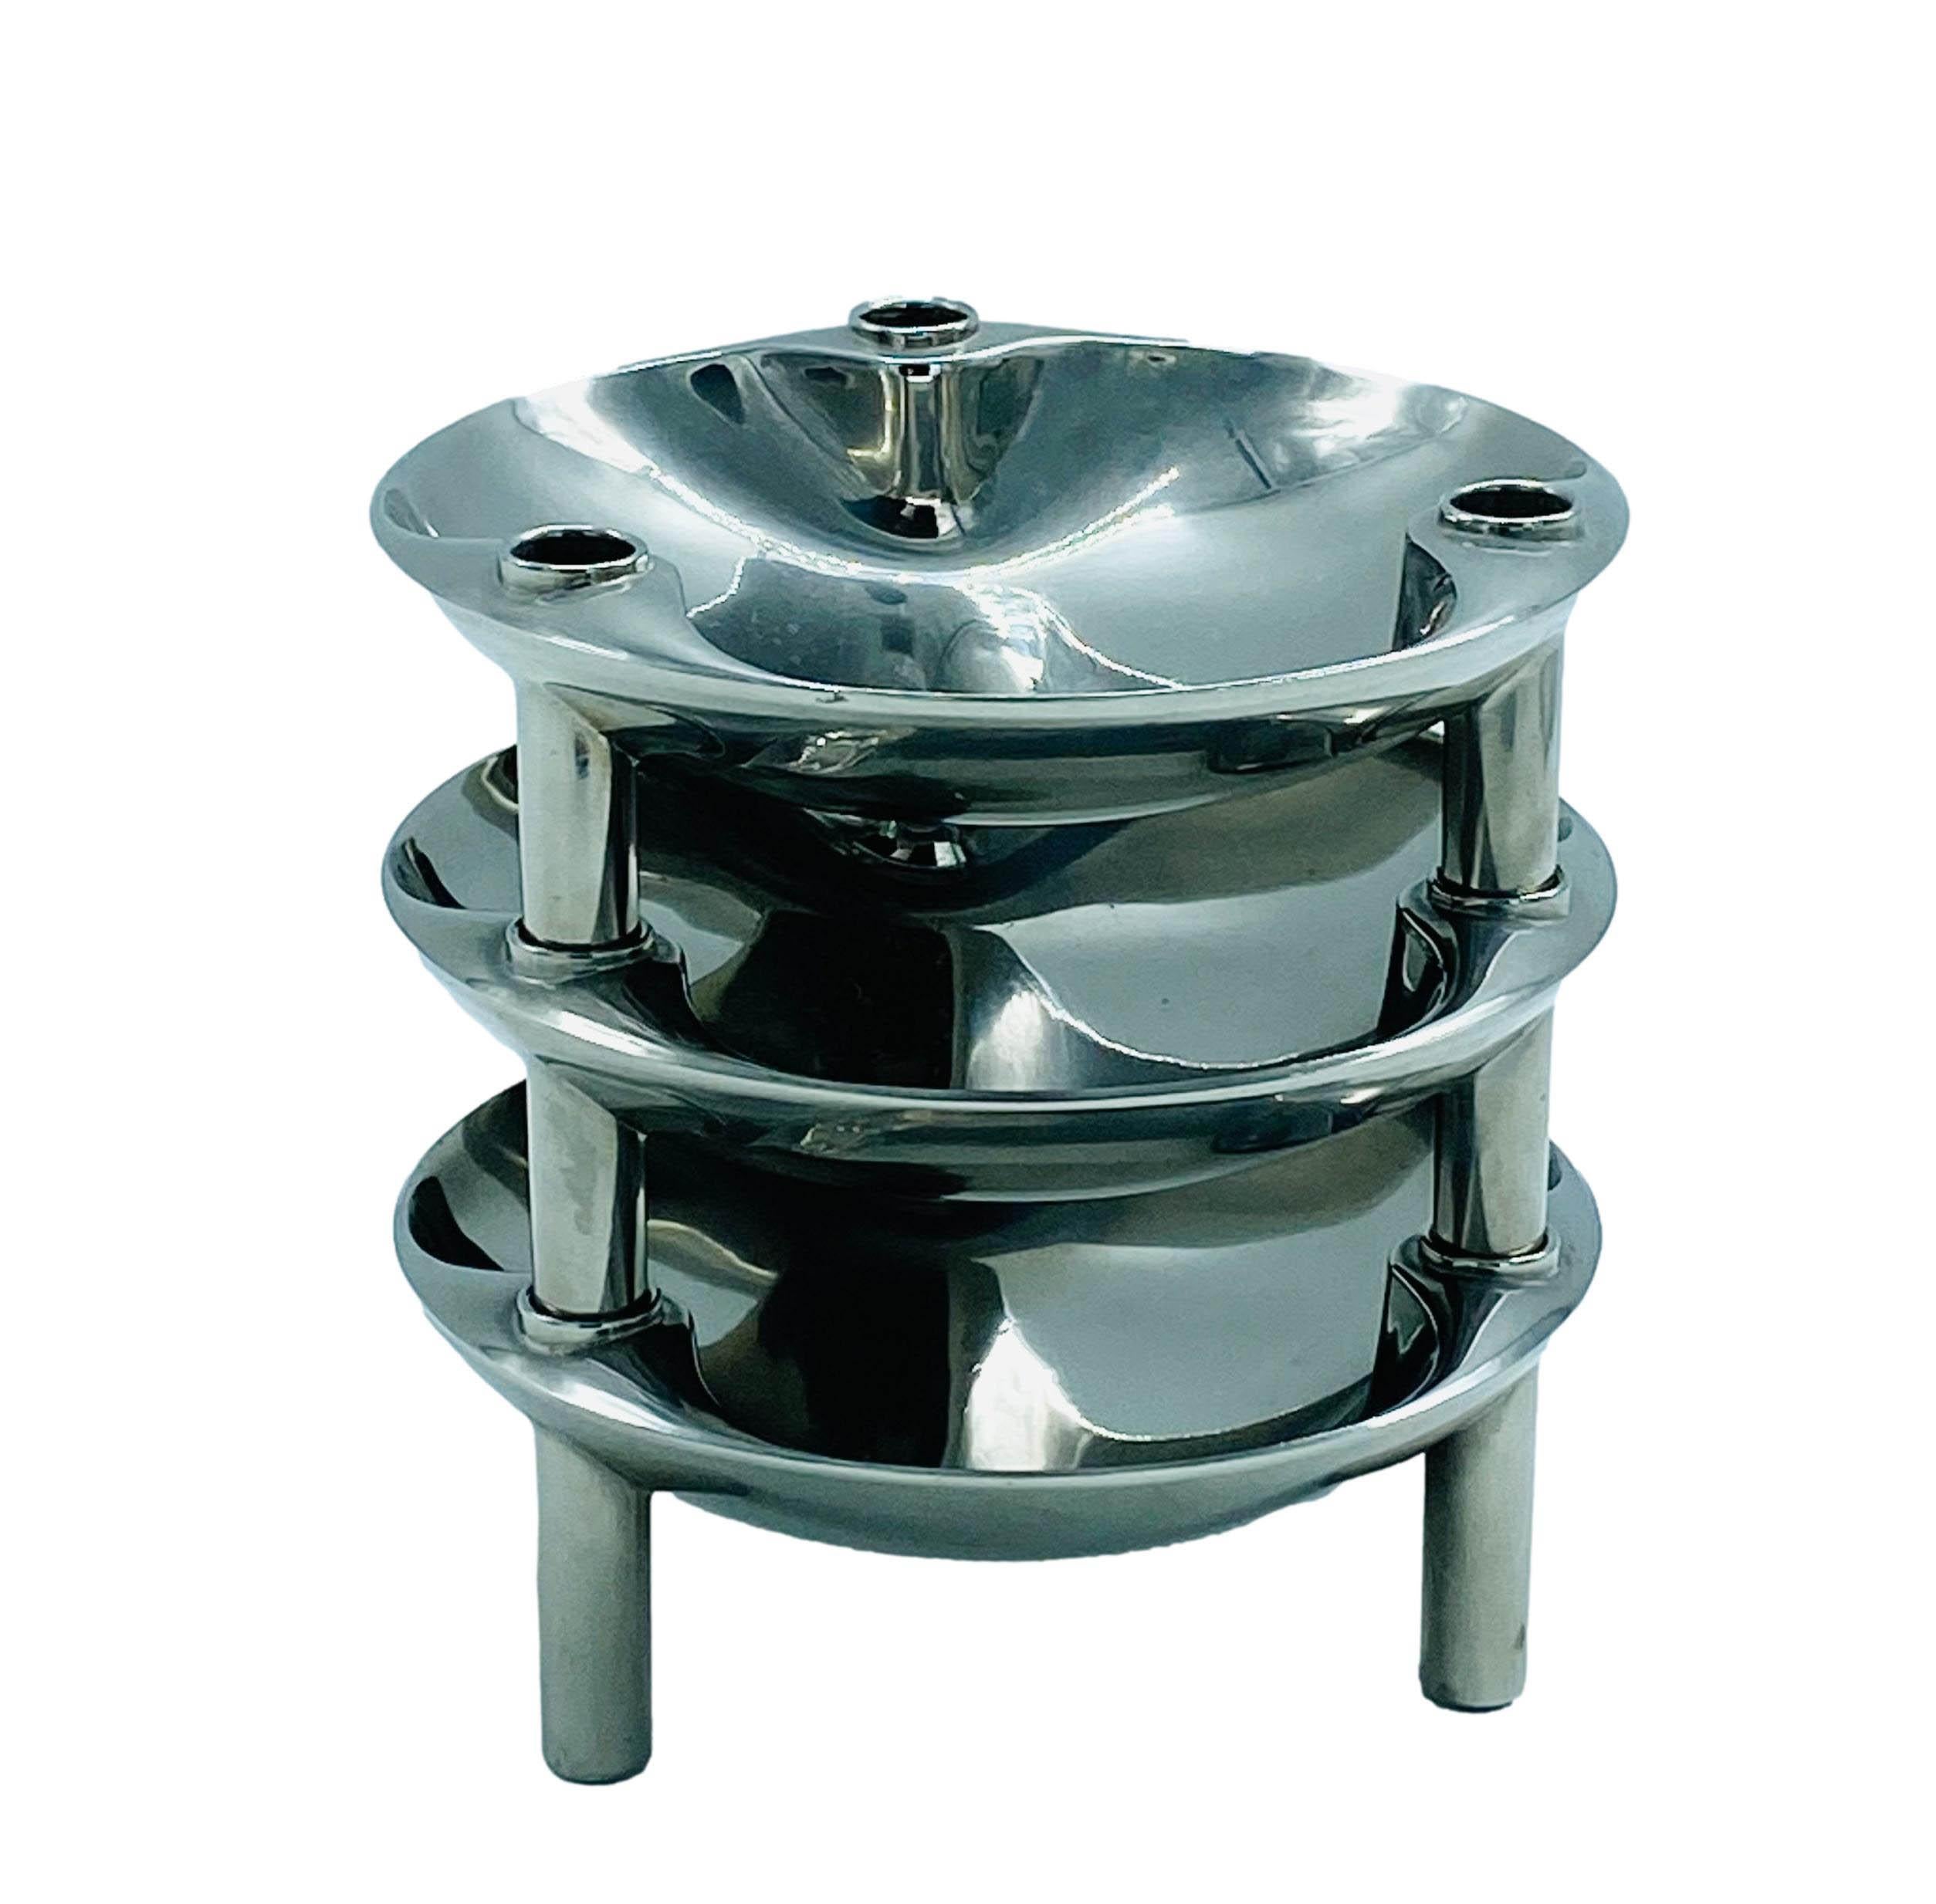 A rare set of classic candle bowls in chrome-plated metal by designer Fritz Nagel, for Caesar Stoffi with three dishes. The set contains 9 candle segments and three plates. It can be configured in various ways, either vertically or horizontally by